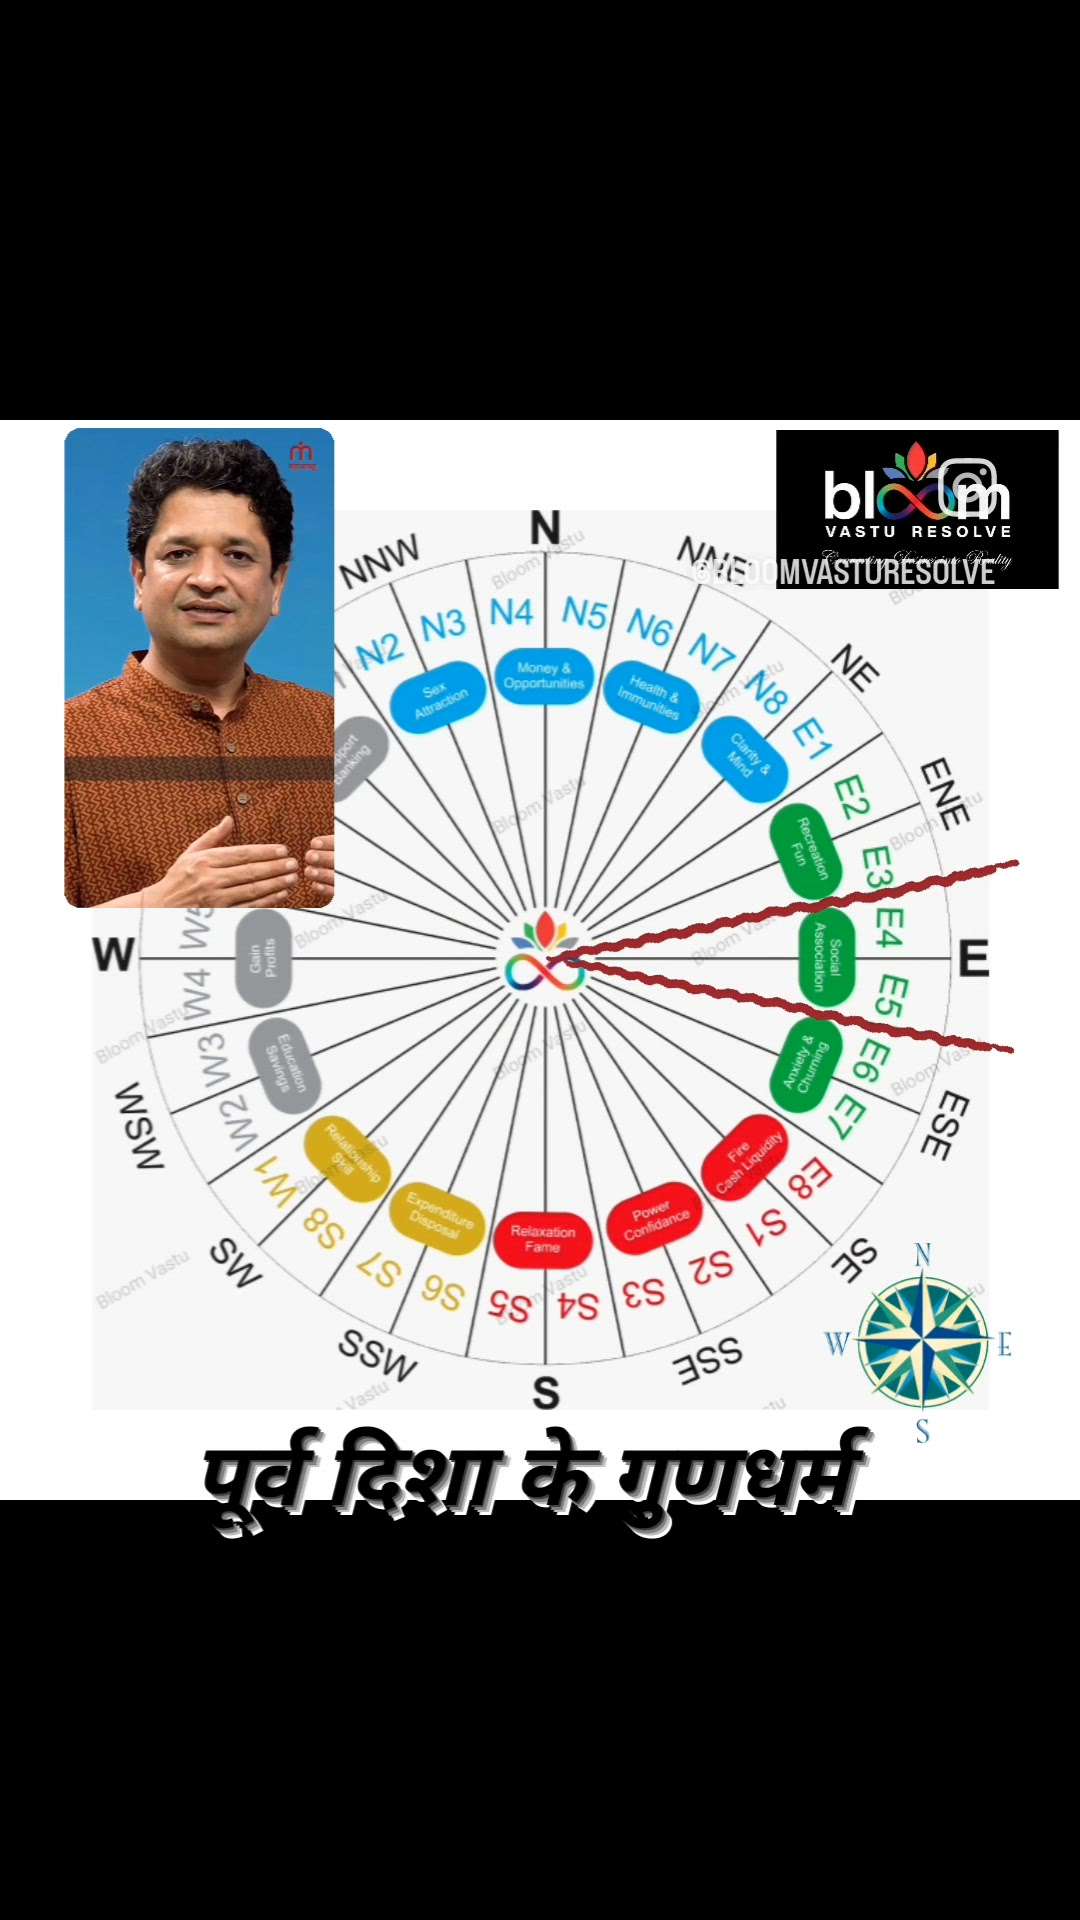 Your queries and comments are always welcome.
For more Vastu please follow @bloomvasturesolve
on YouTube, Instagram & Facebook
.
.
For personal consultation, feel free to contact certified MahaVastu Expert through
M - 9826592271
Or
bloomvasturesolve@gmail.com
#vastu #वास्तु #mahavastu #mahavastuexpert #bloomvasturesolve  #vastureels #vastulogy #vastuexpert  #vasturemedies  #vastuforhome #vastuforpeace #vastudosh #numerology #vastuforgrowth #numerology #eastzone  #पूर्वदिशा